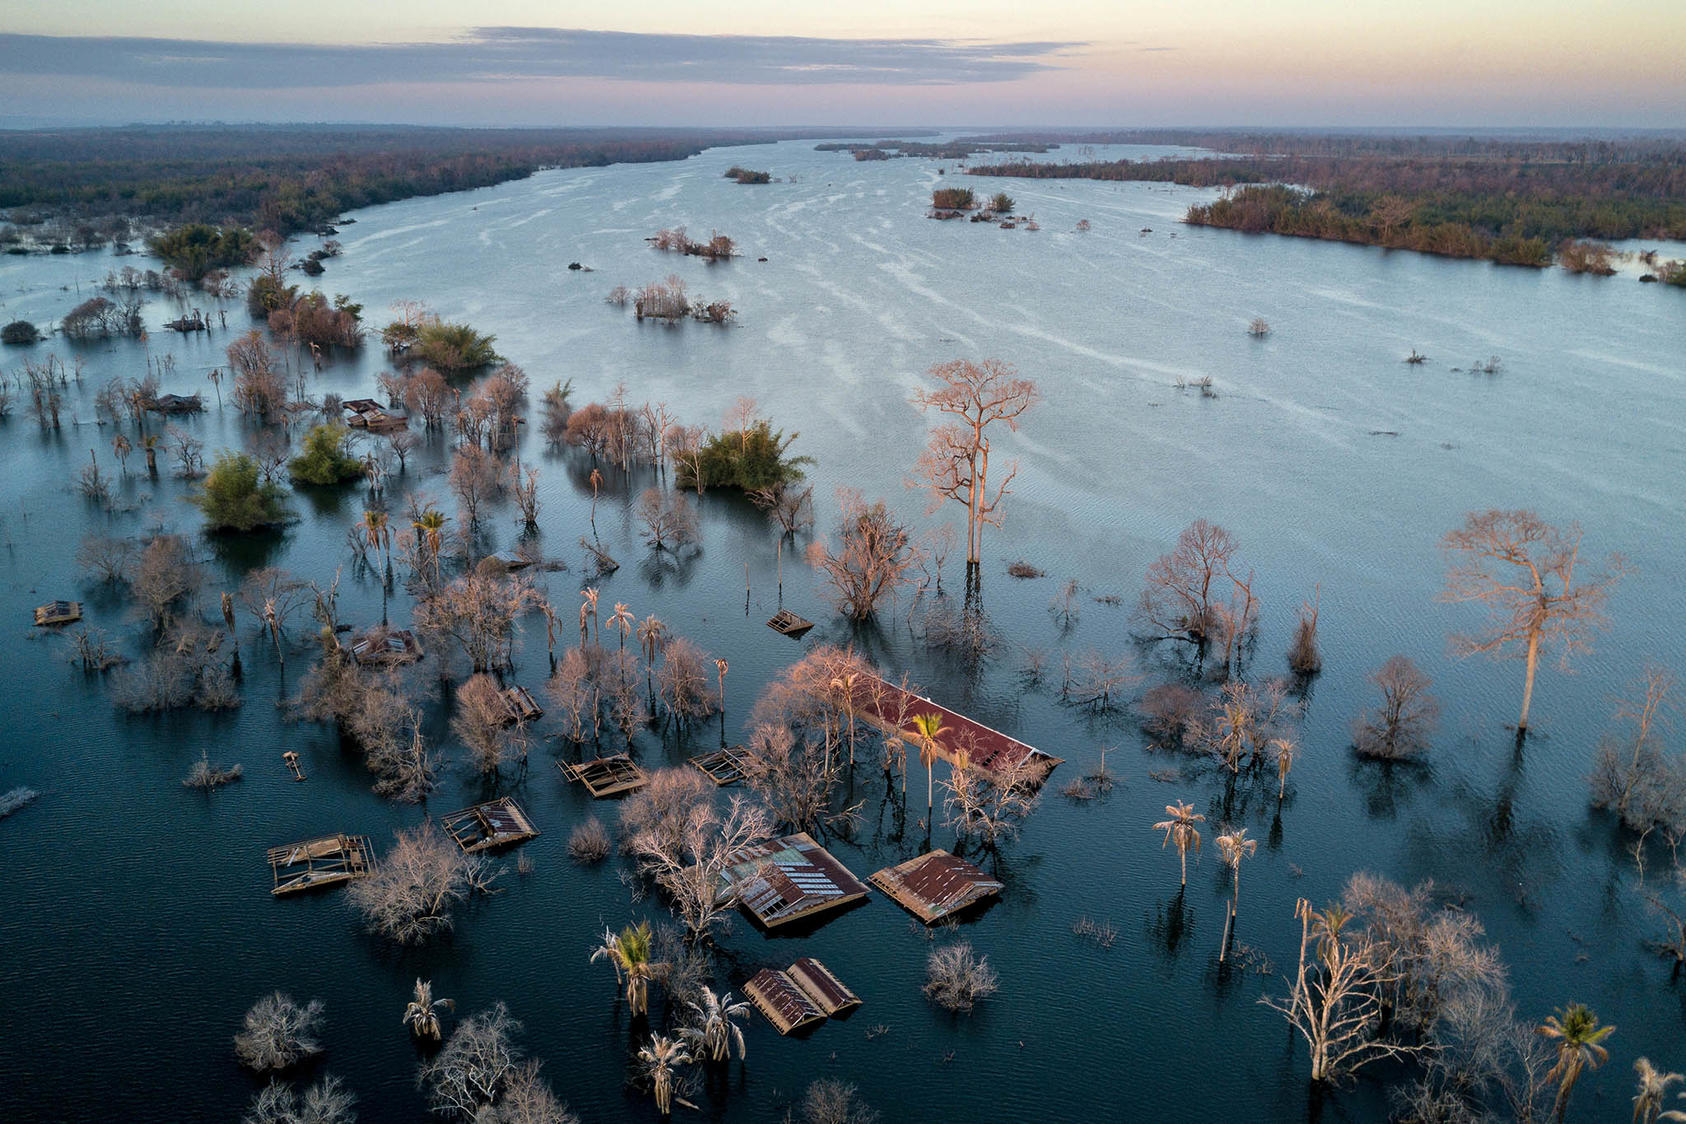 Srekor village was submerged when the reservoir for the Lower Sesan 2 Dam began filling up in late 2017, in Cambodia on Dec. 6, 2018. (Sergey Ponomarev/The New York Times)